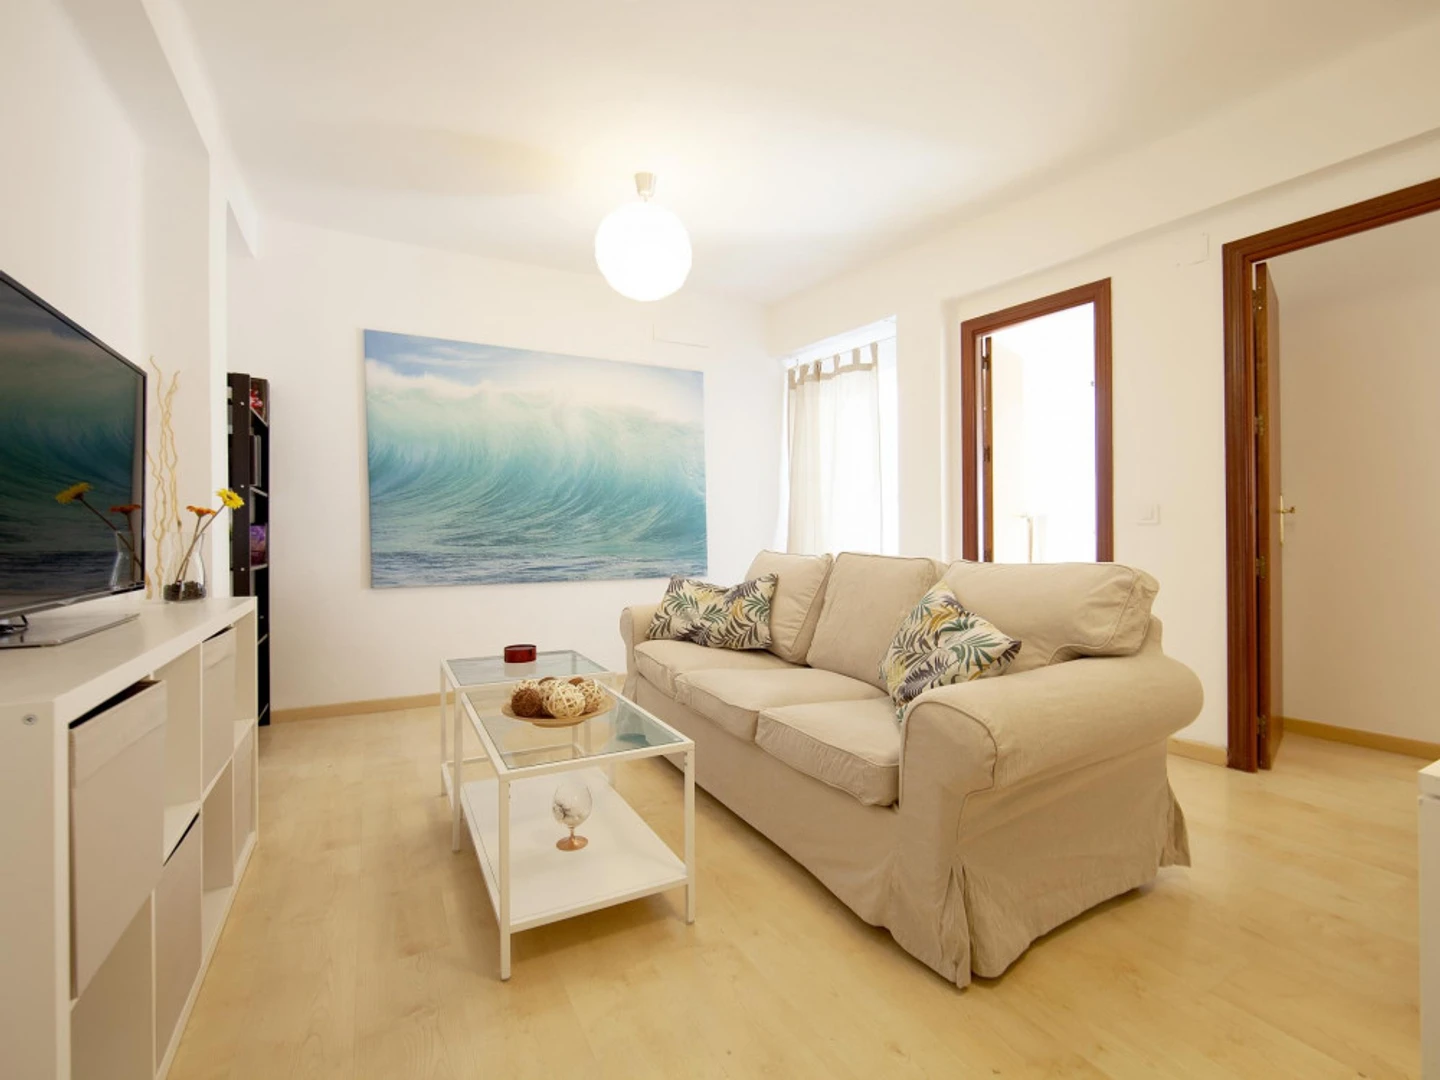 Accommodation in the centre of Malaga